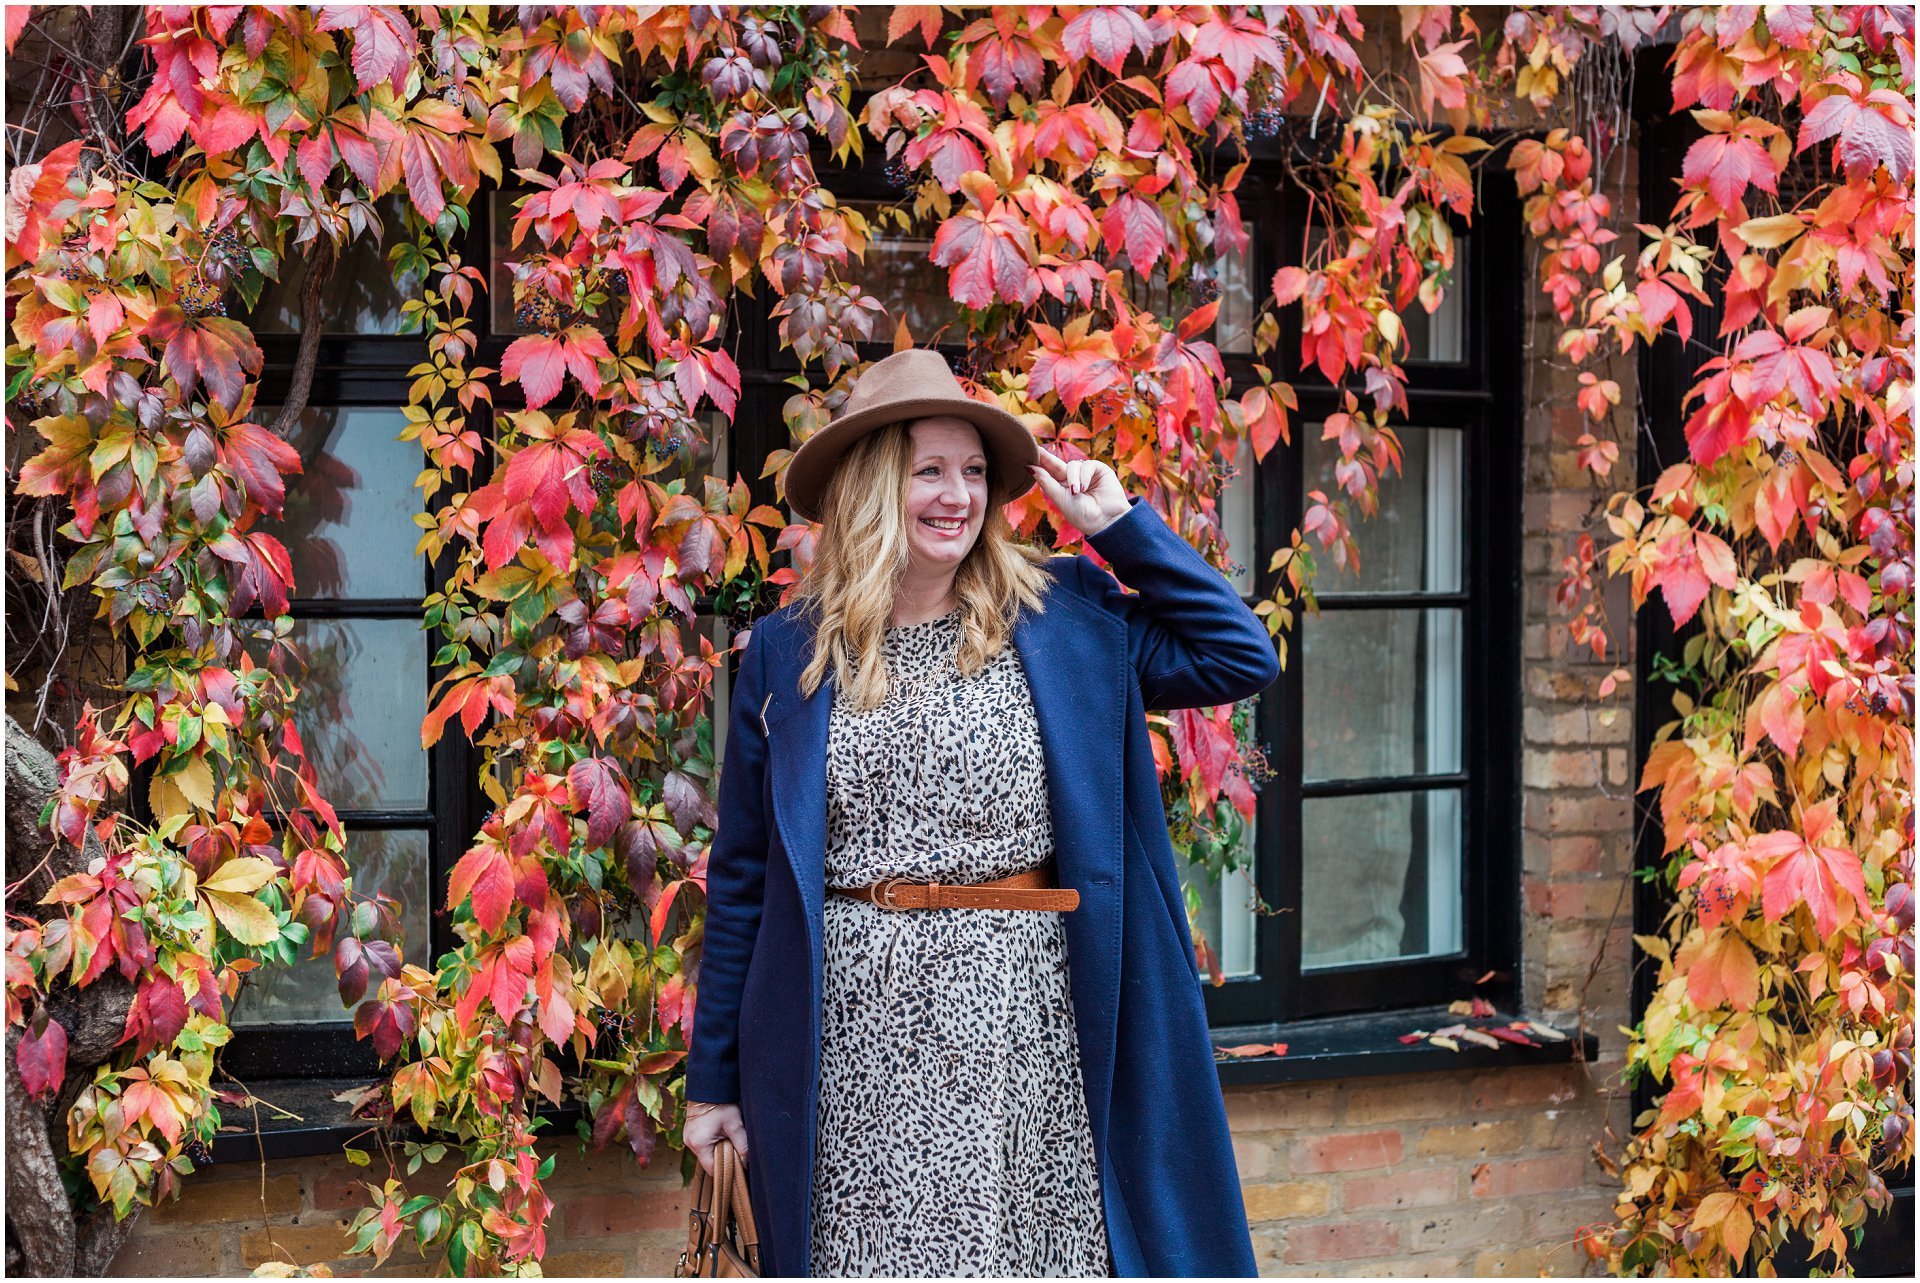 autumnal brand photography with Shelly Shulman Strategy - image by London brand photographer AKP Branding Stories